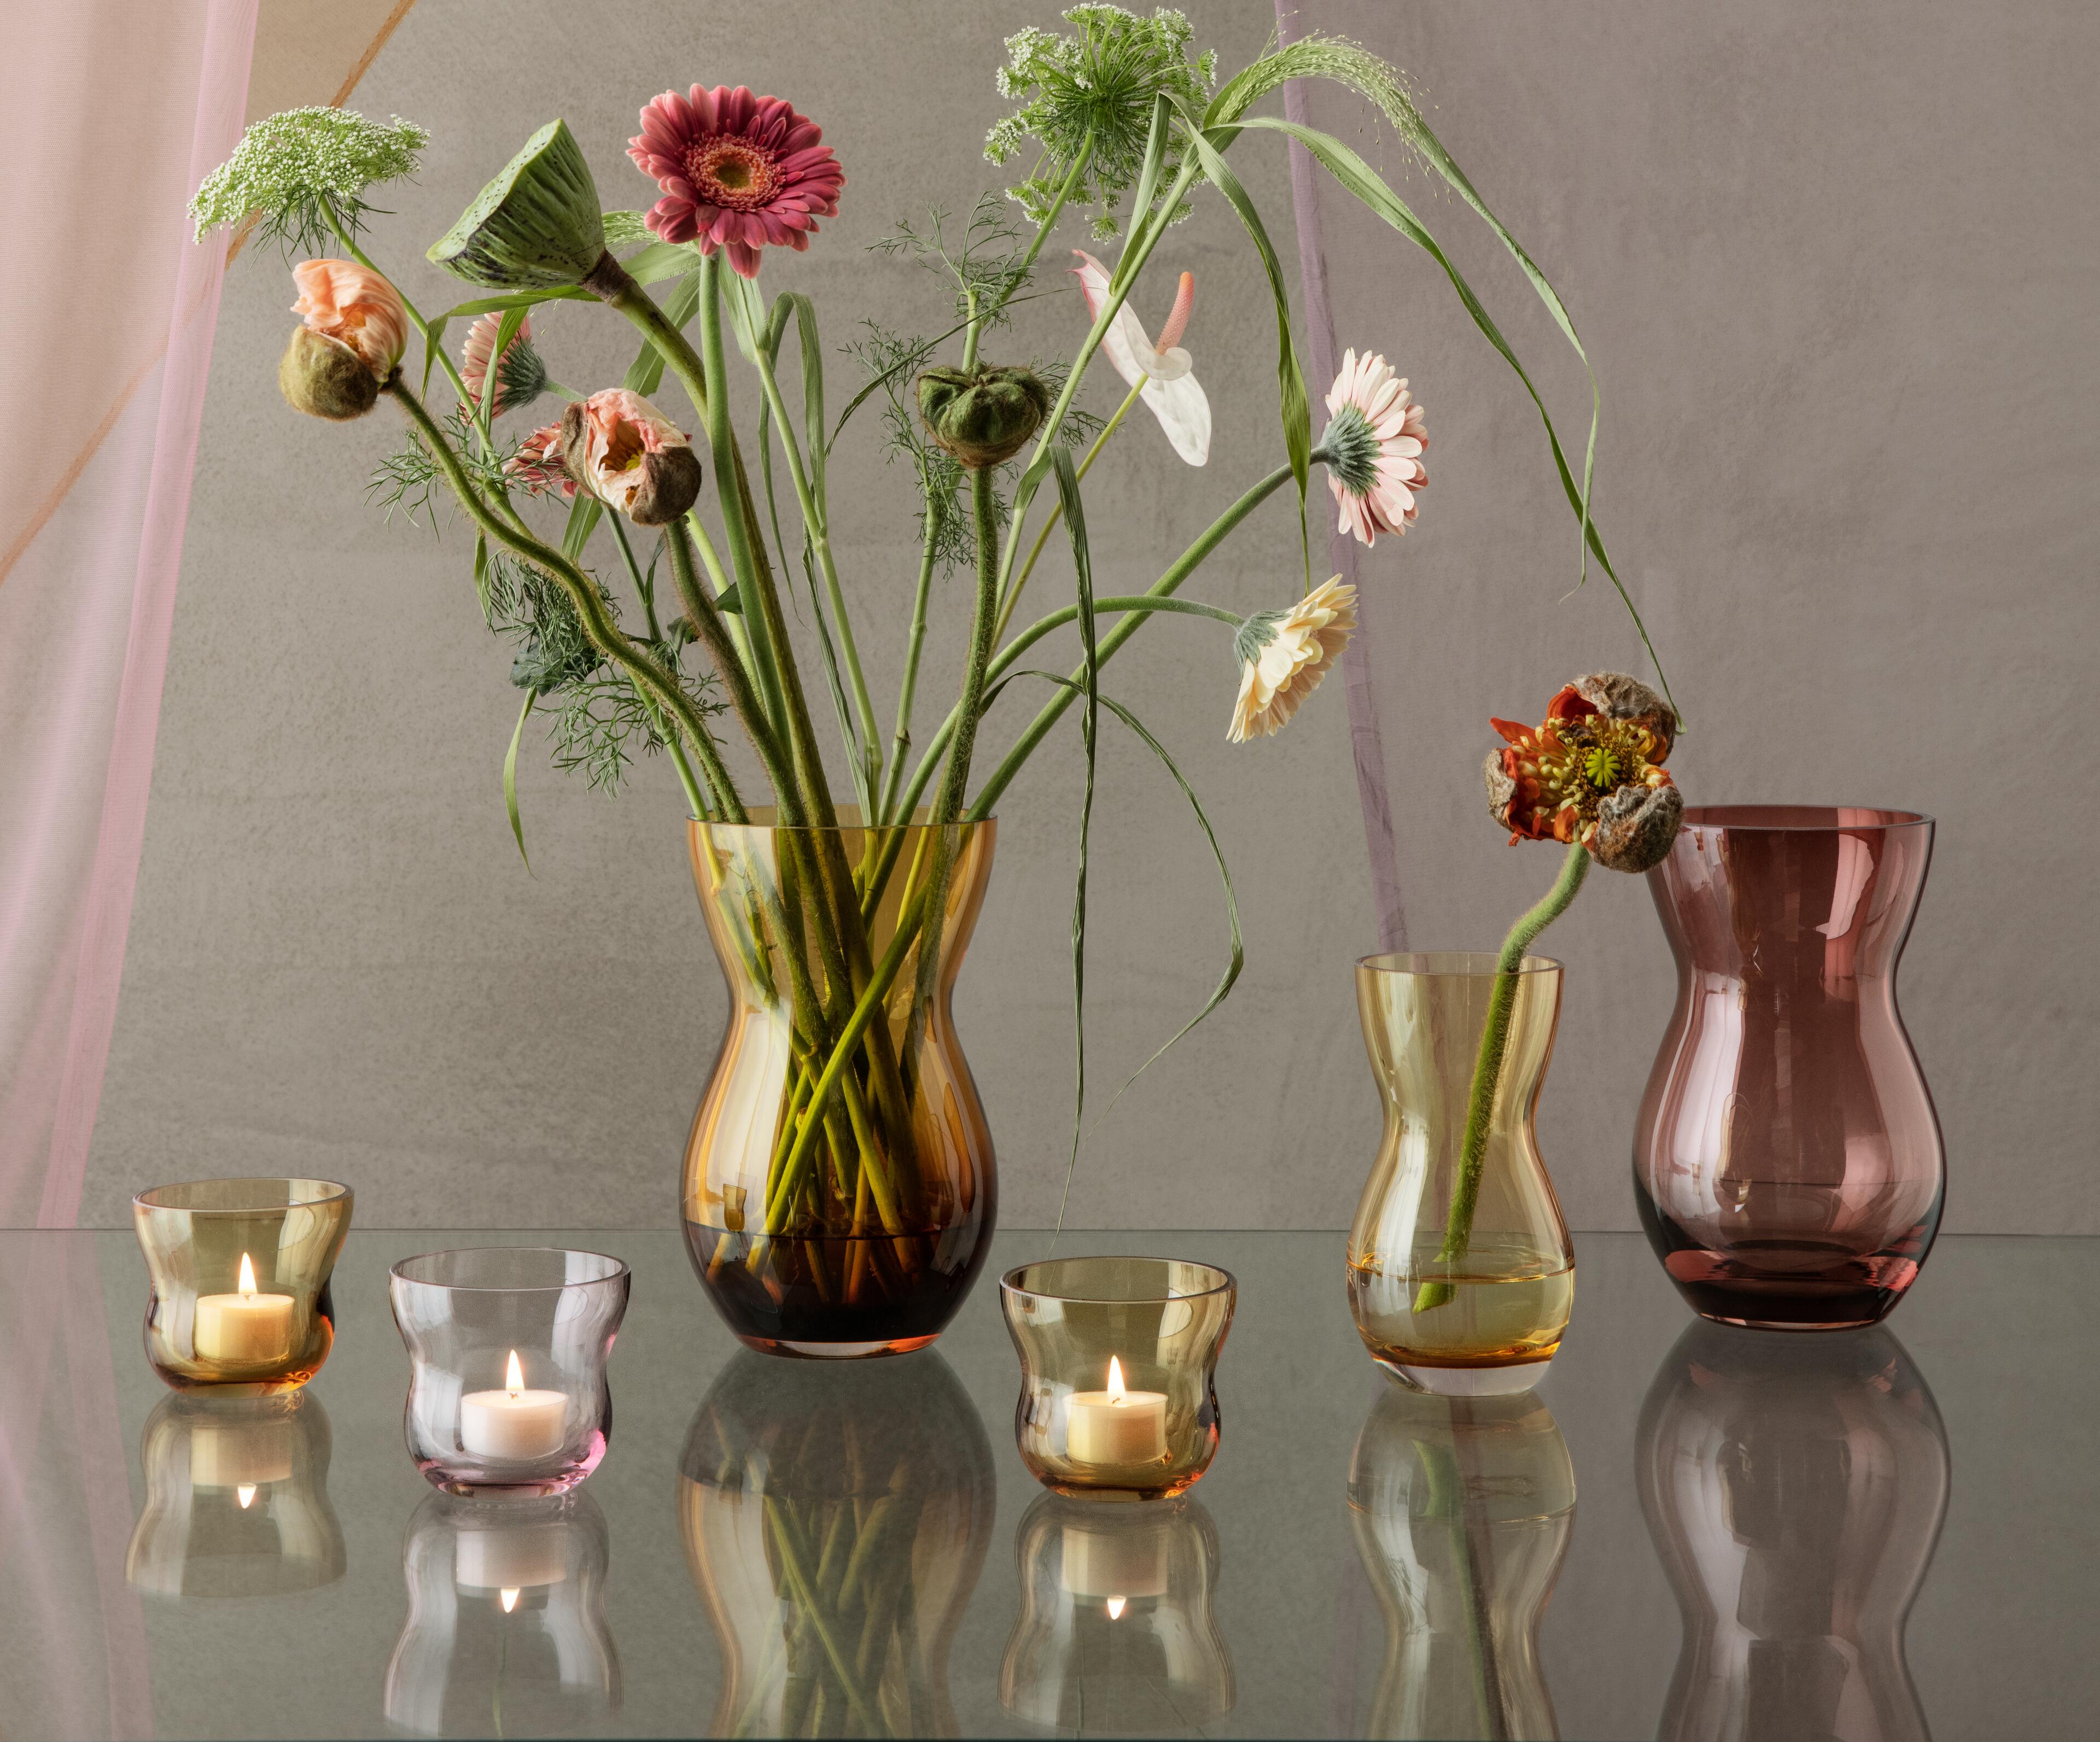 Vases and tealight holders from the Holmegaard Calabas series